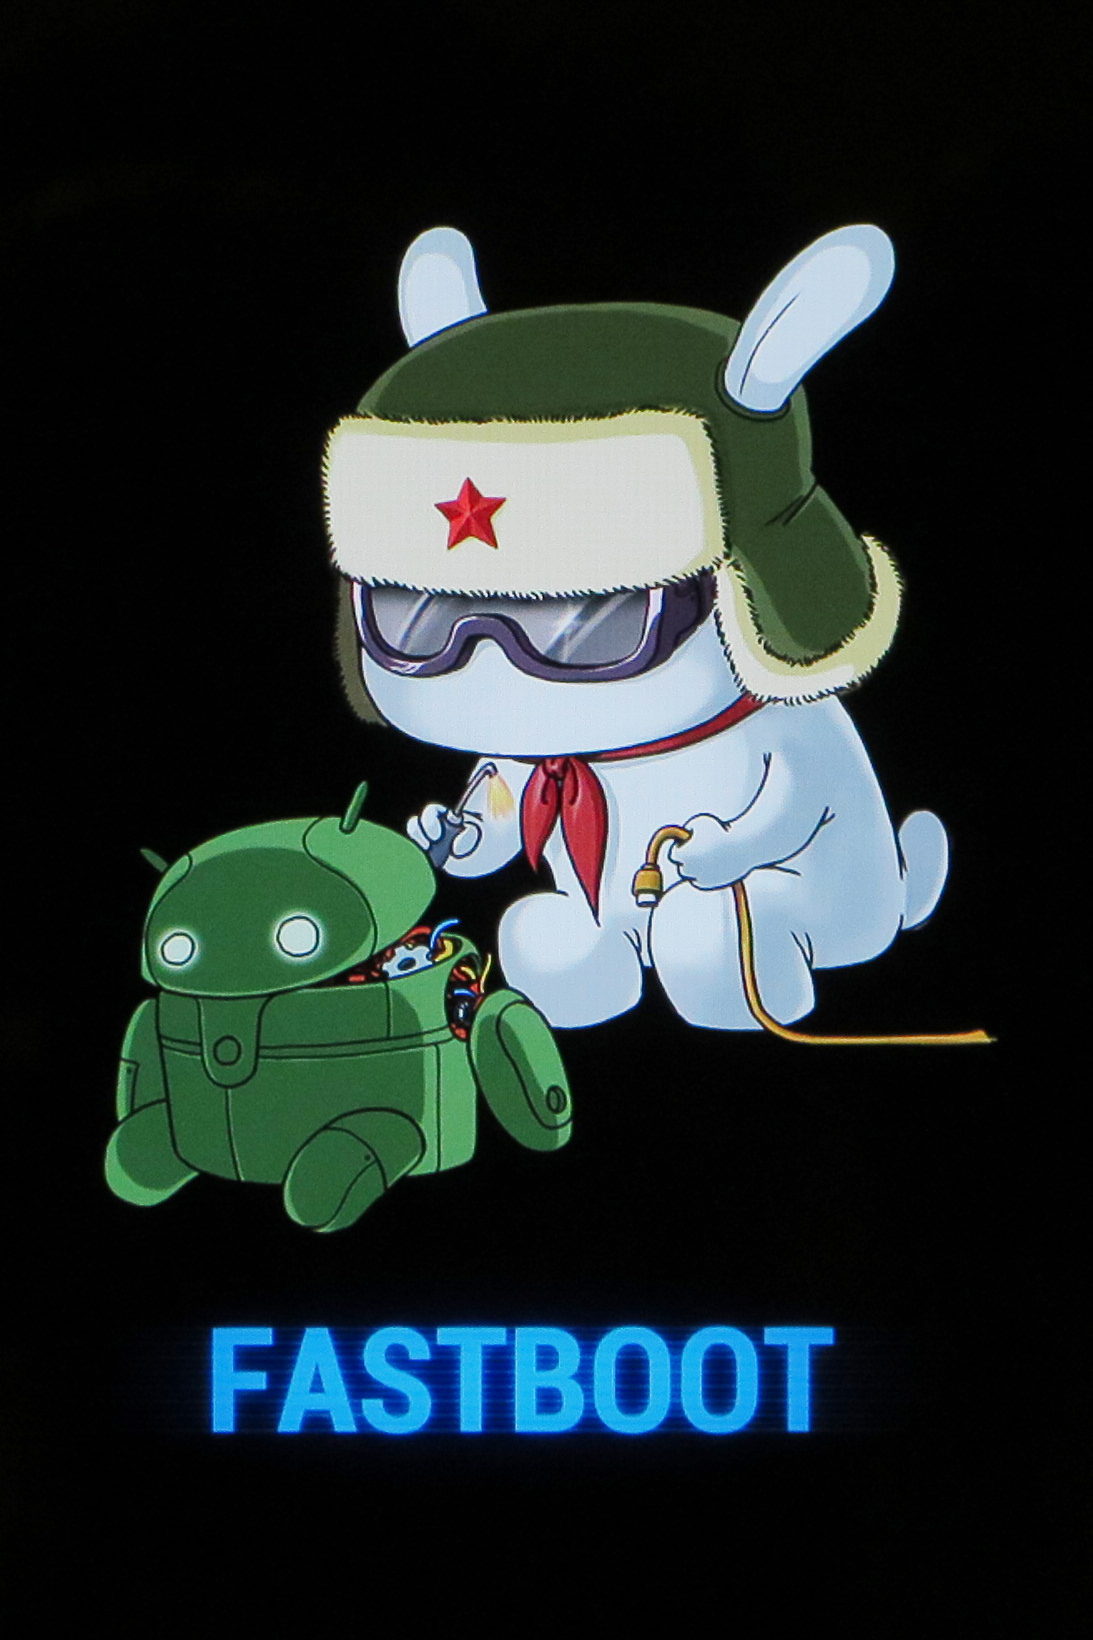 doc:appunti:hardware:android:mi-a1-fastboot-log.jpg